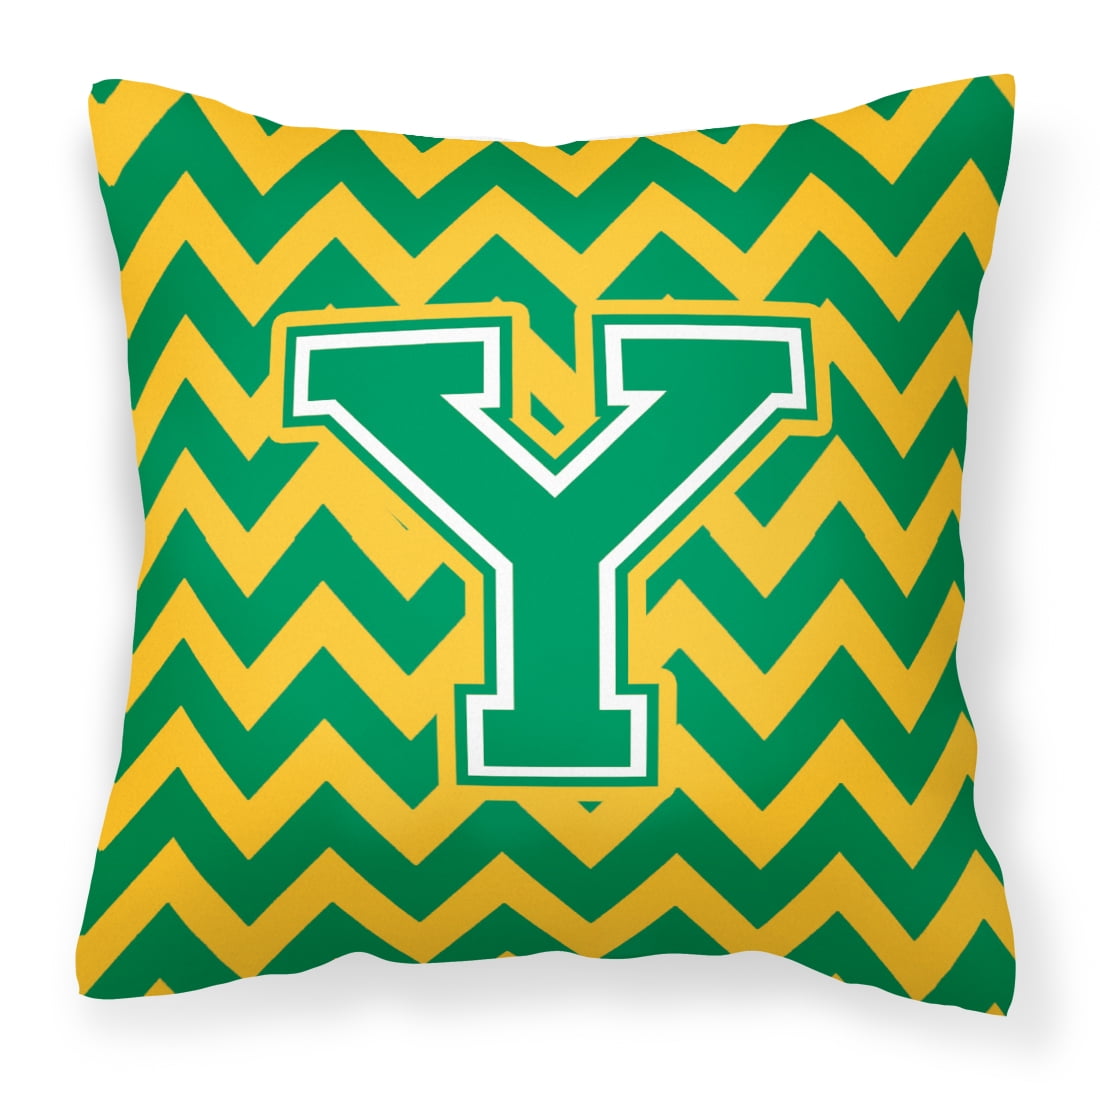 Letter Y Chevron Green and Gold Fabric Decorative Pillow - Walmart.com